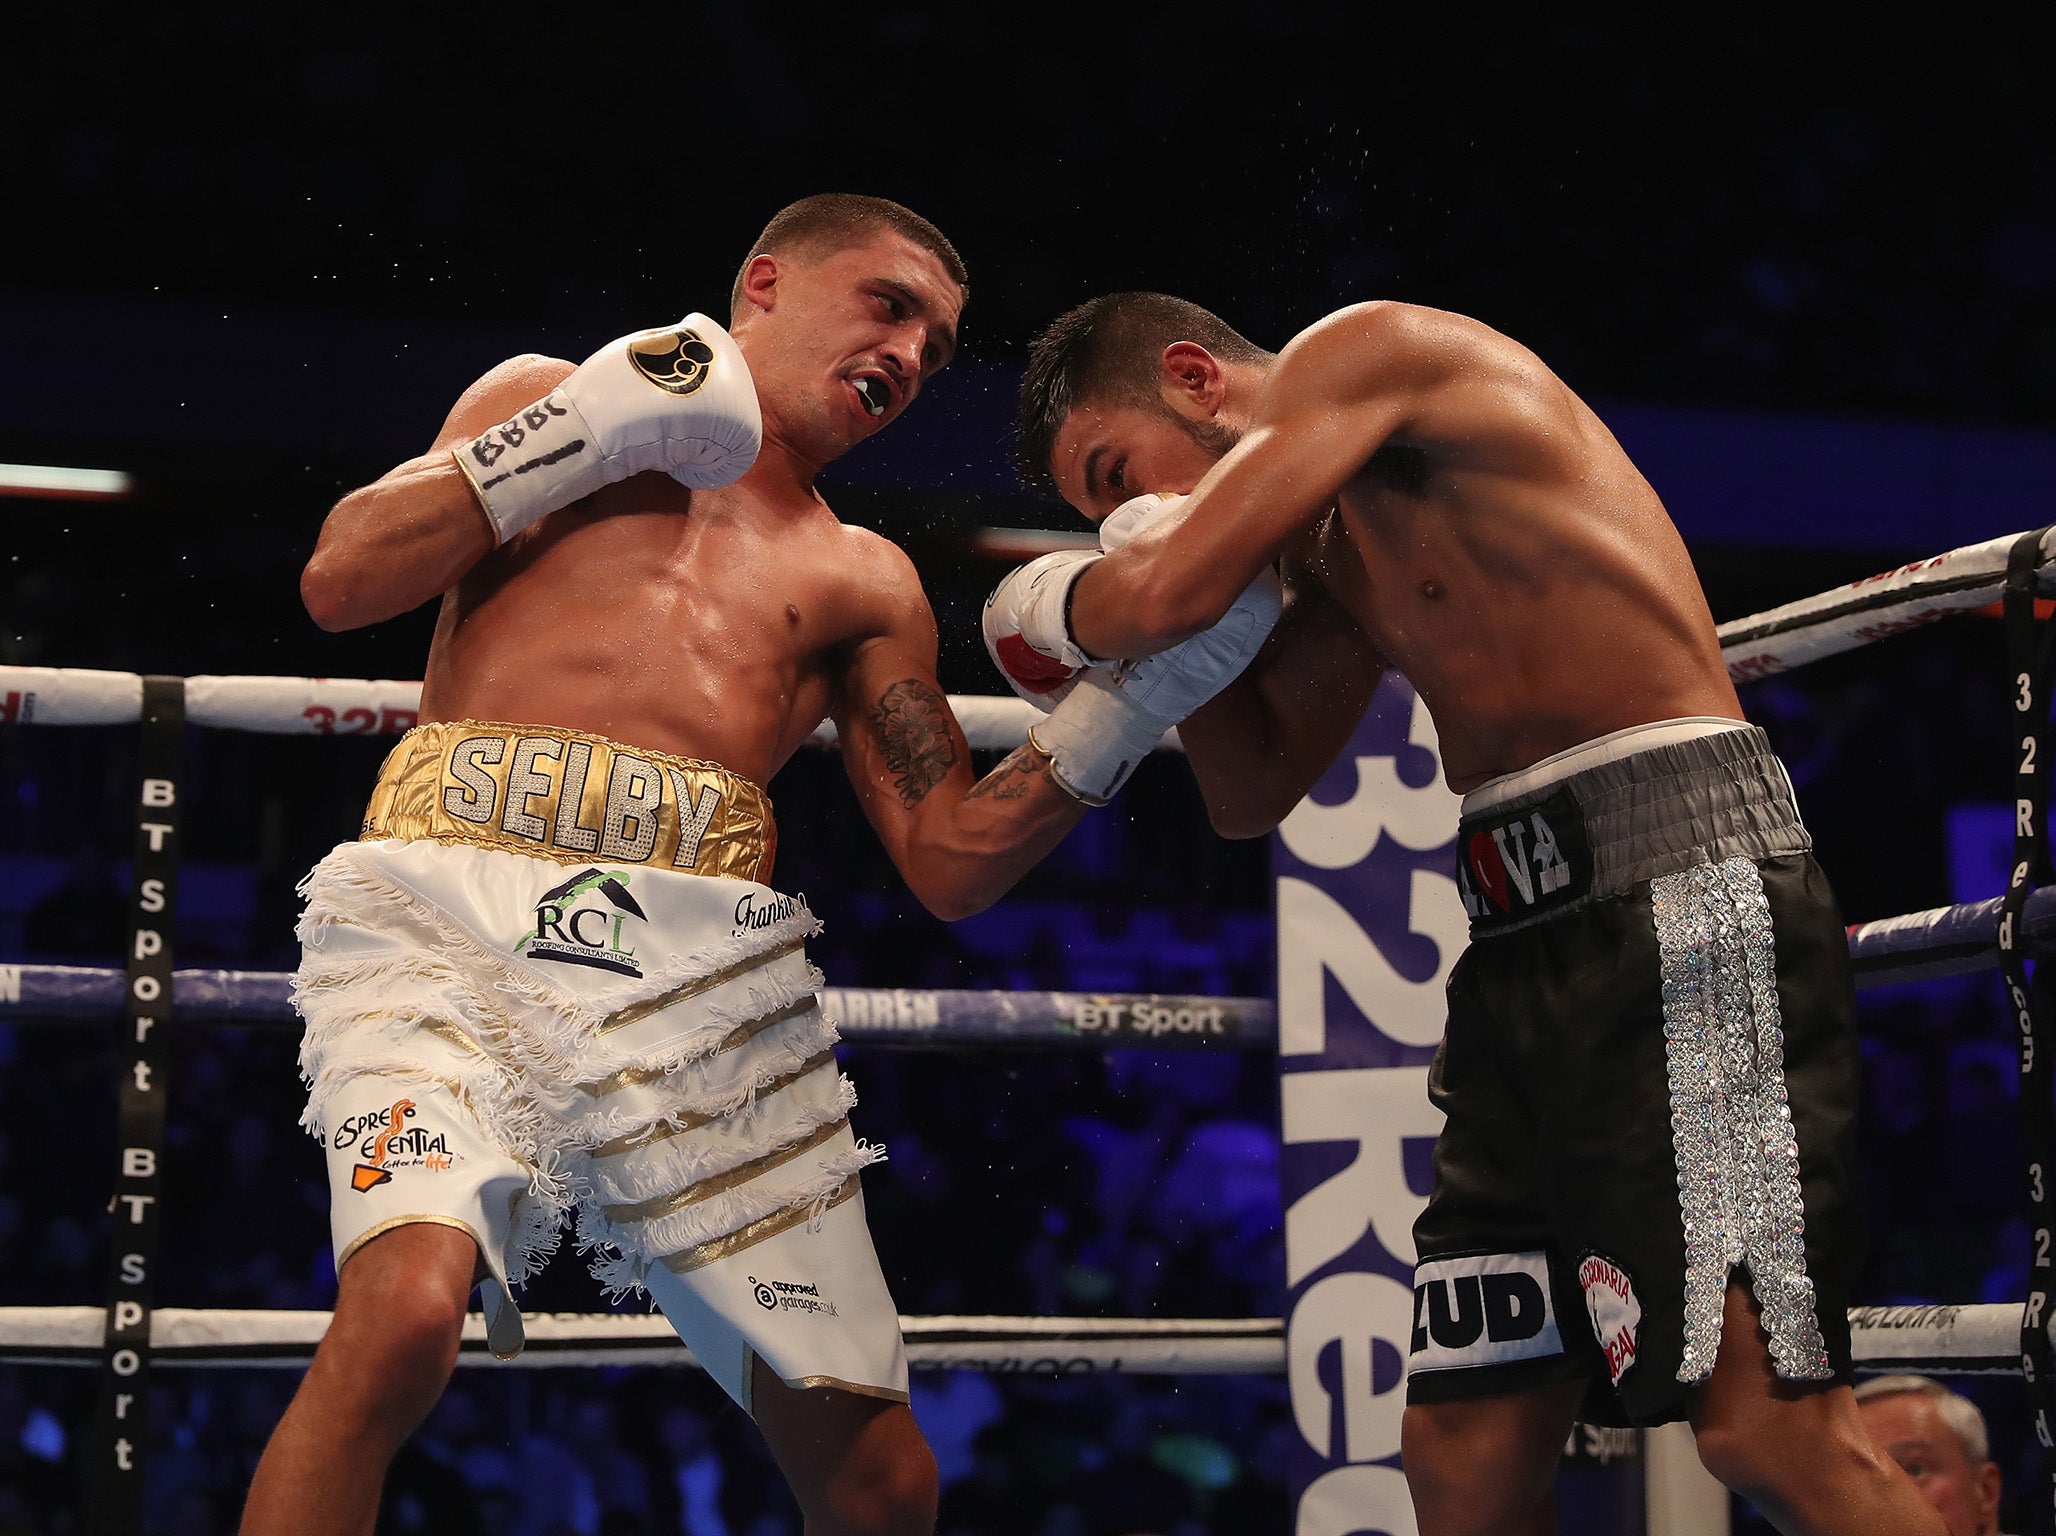 Selby successfully defended his world title